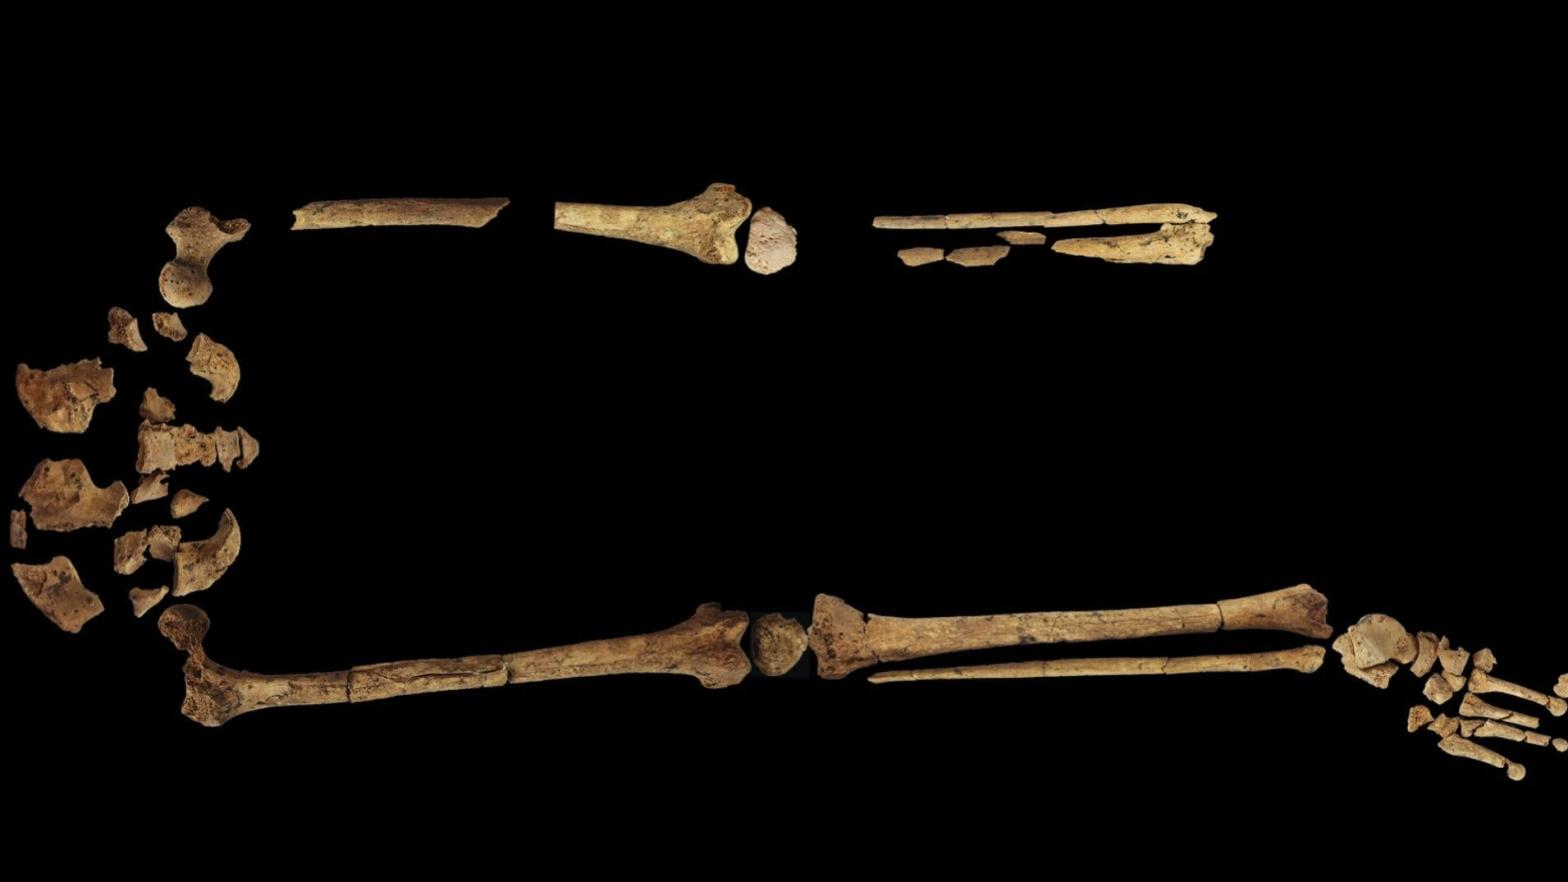 The  skeletal remains of a man's right and left leg, showing that the left foot was completely amputated years before his death.  (Image: Maloney, et al/Nature)